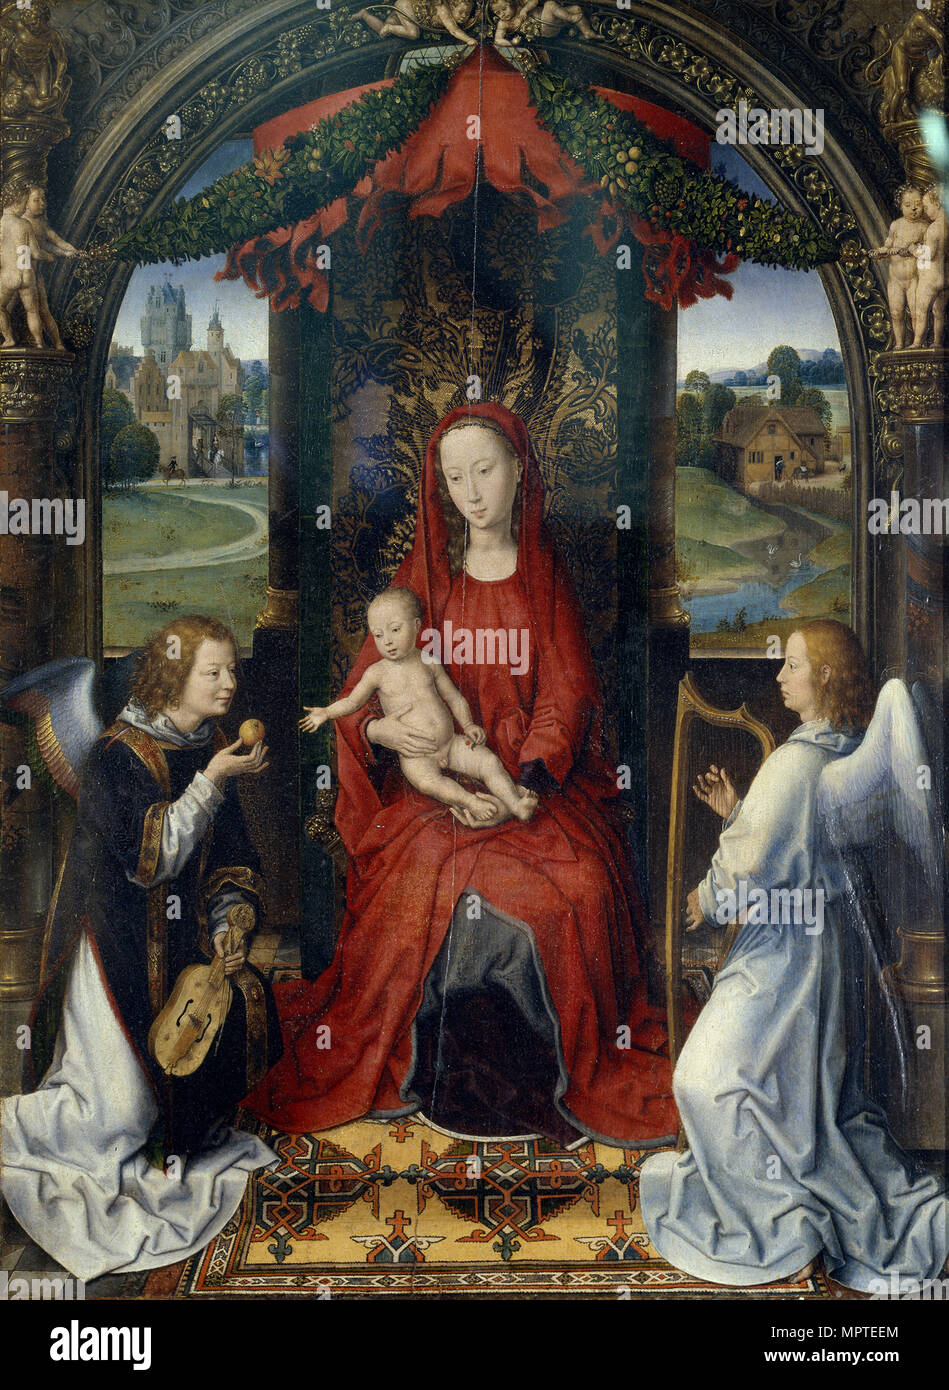 Virgin and Child with Angels. Central Panel of the Pagagnotti Triptych, c. 1480. Stock Photo